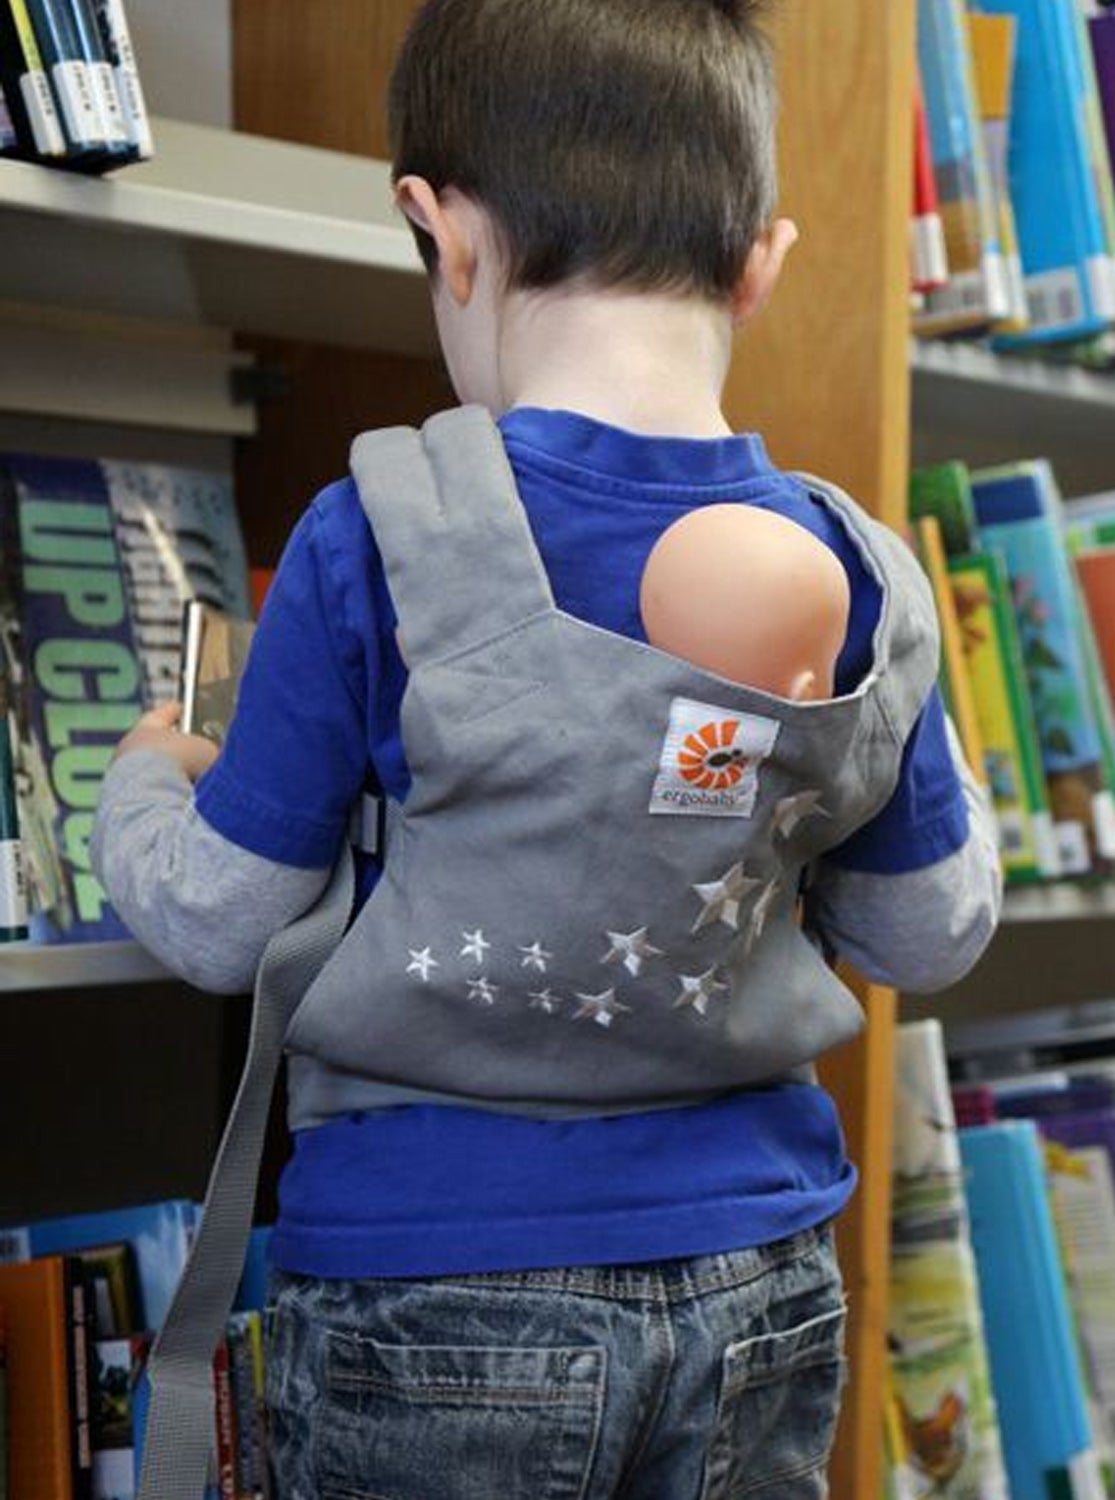 ERGOBABY Doll Carrier - ANB Baby -$20 - $50